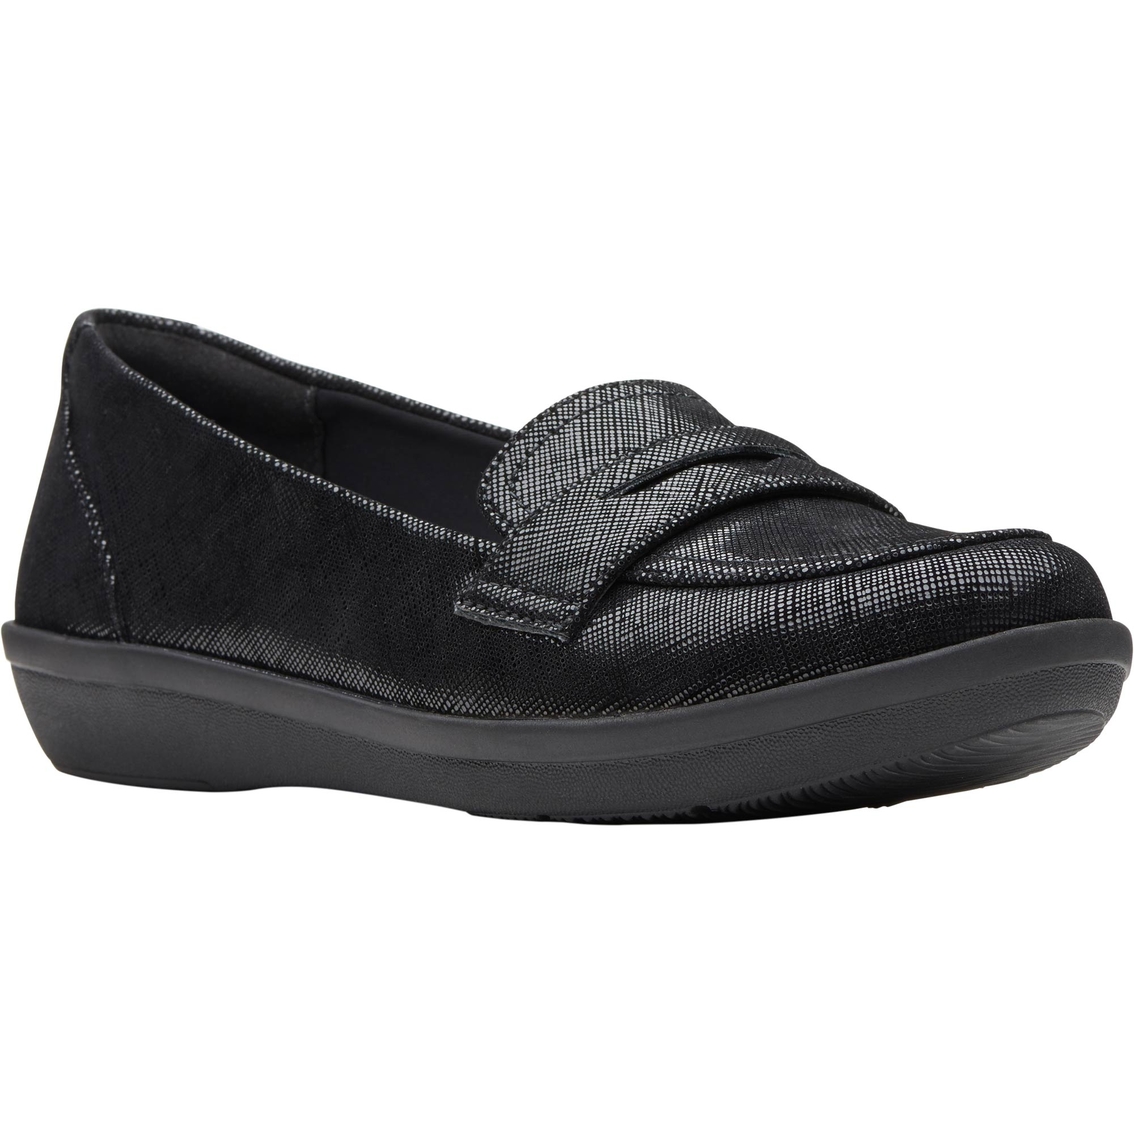 clarks cloudsteppers loafers